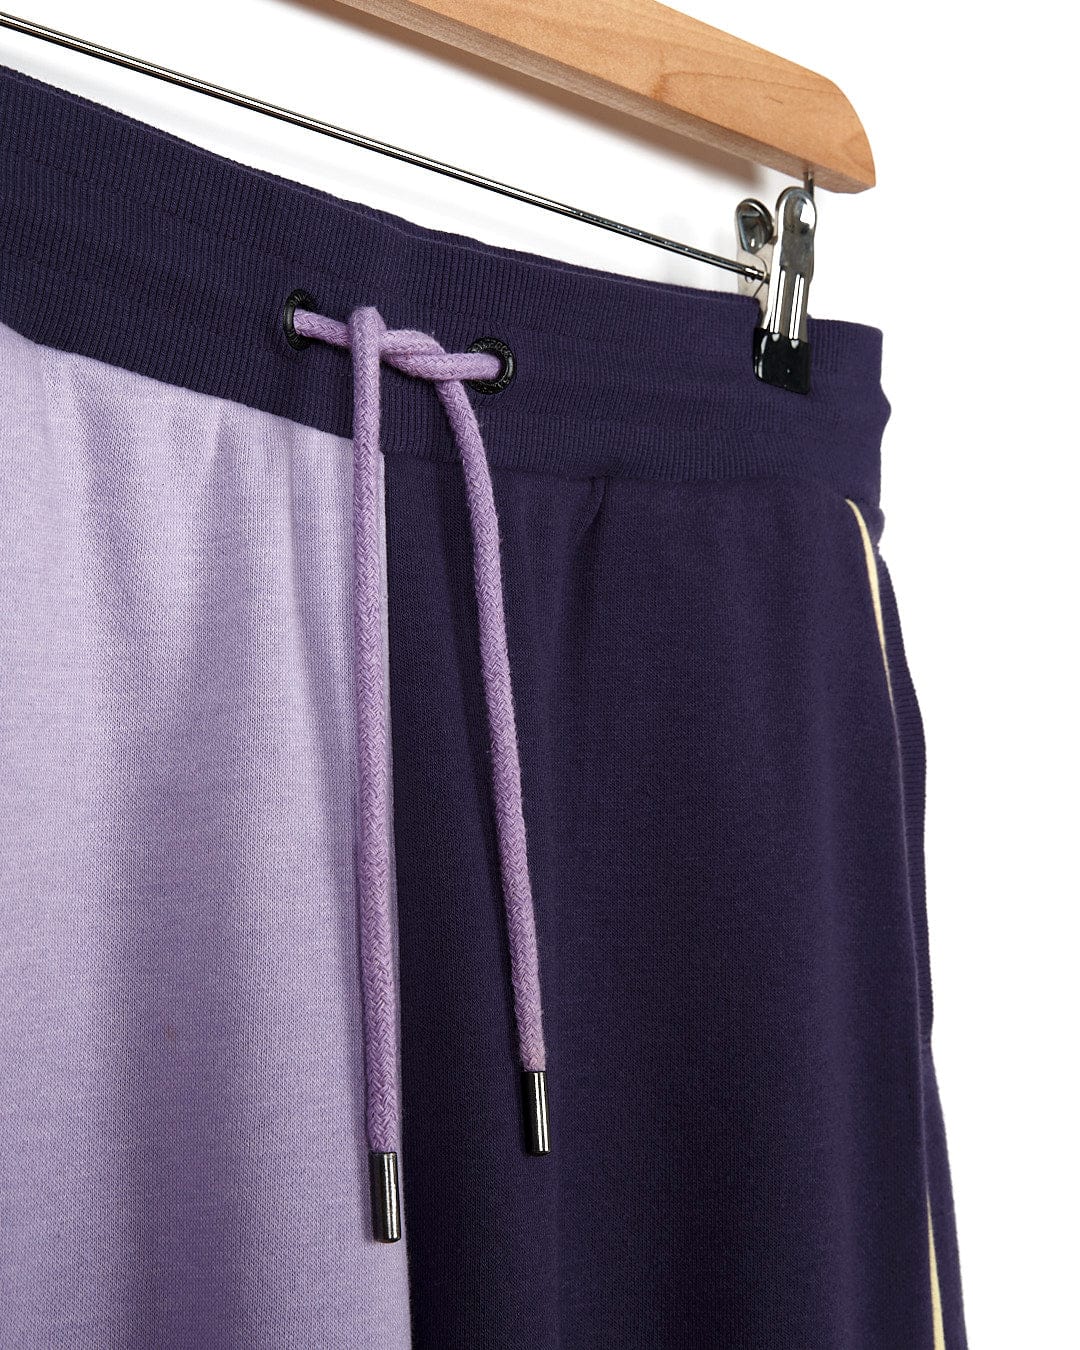 A pair of Betty - Womens Jogger - Light Purple sweatpants by Saltrock hanging on a hanger.